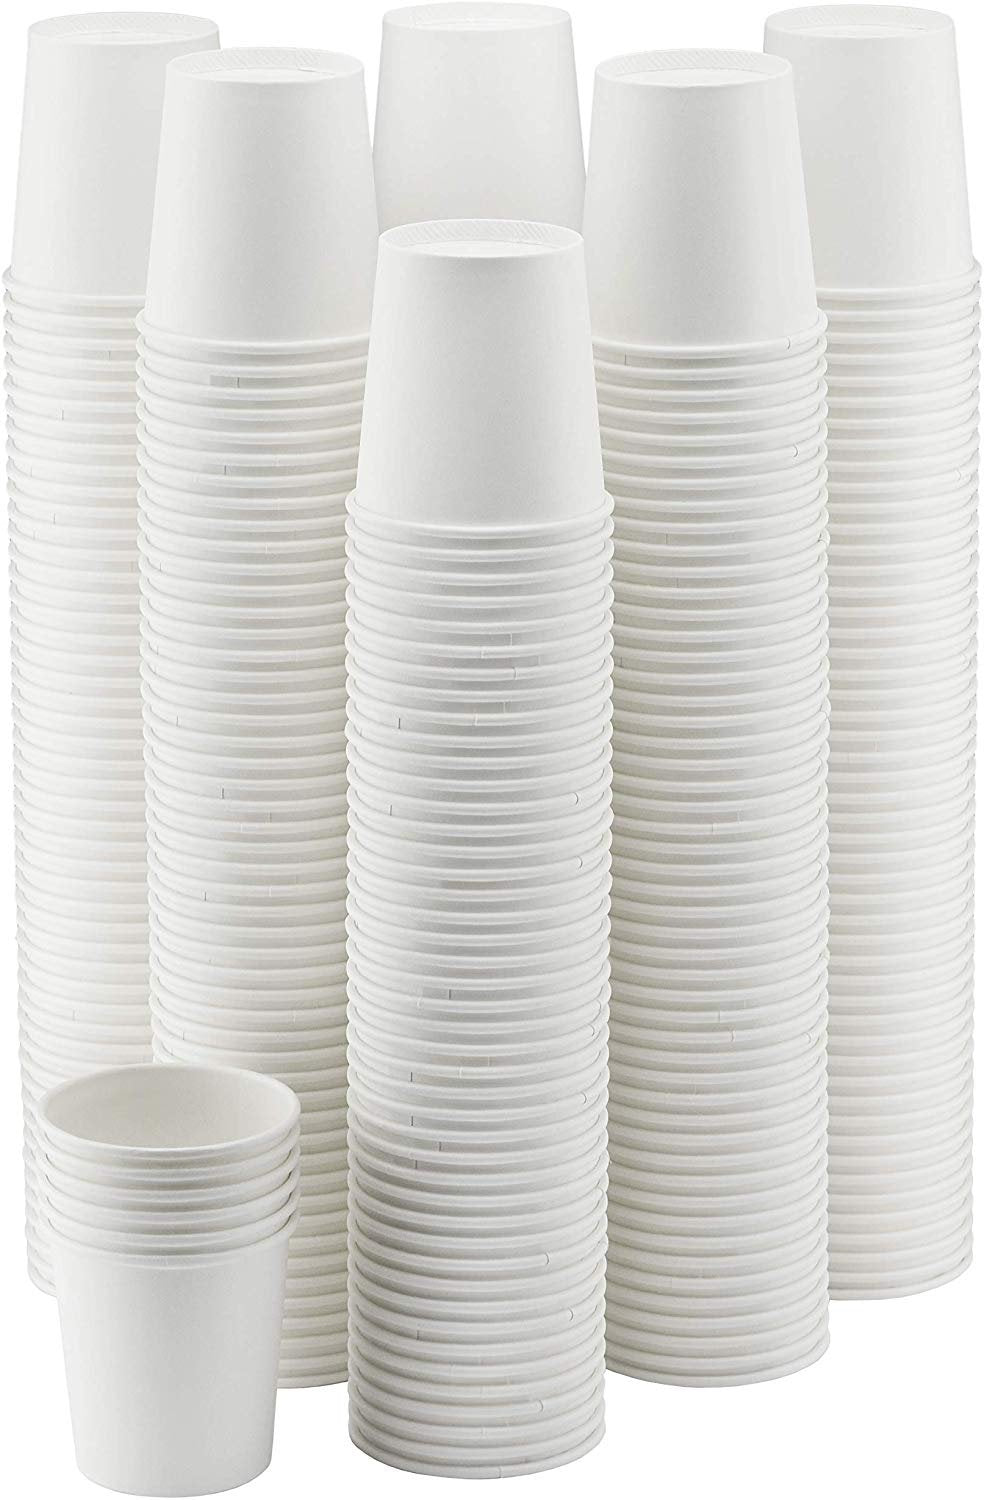 300-Pack 4 oz. White Paper Cups for Hot/Cold Drinks - Ideal for Partie